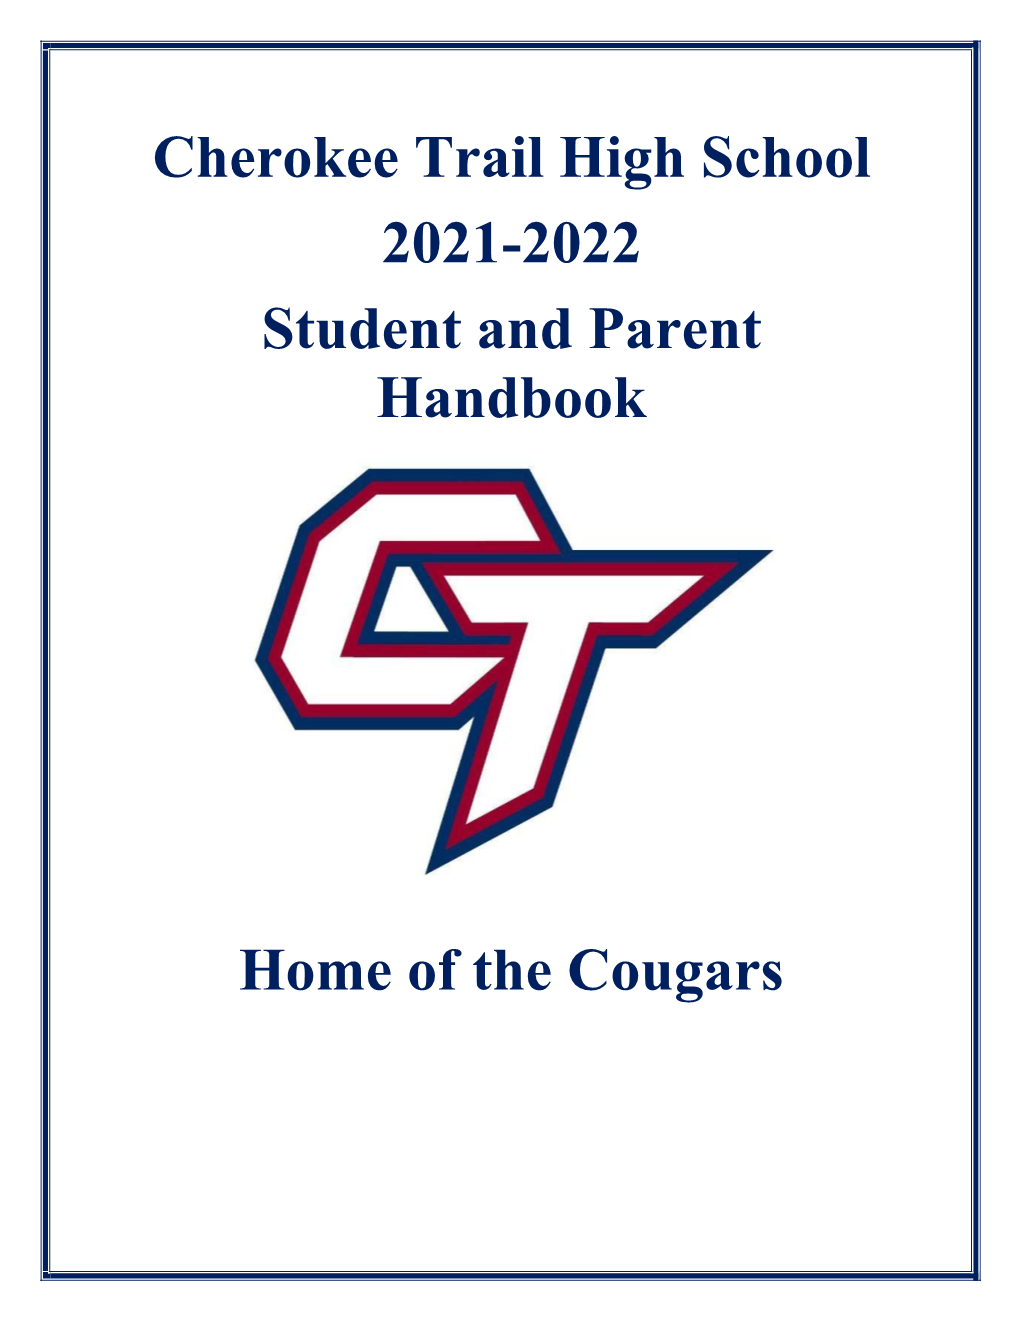 Cherokee Trail High School 2021-2022 Student and Parent